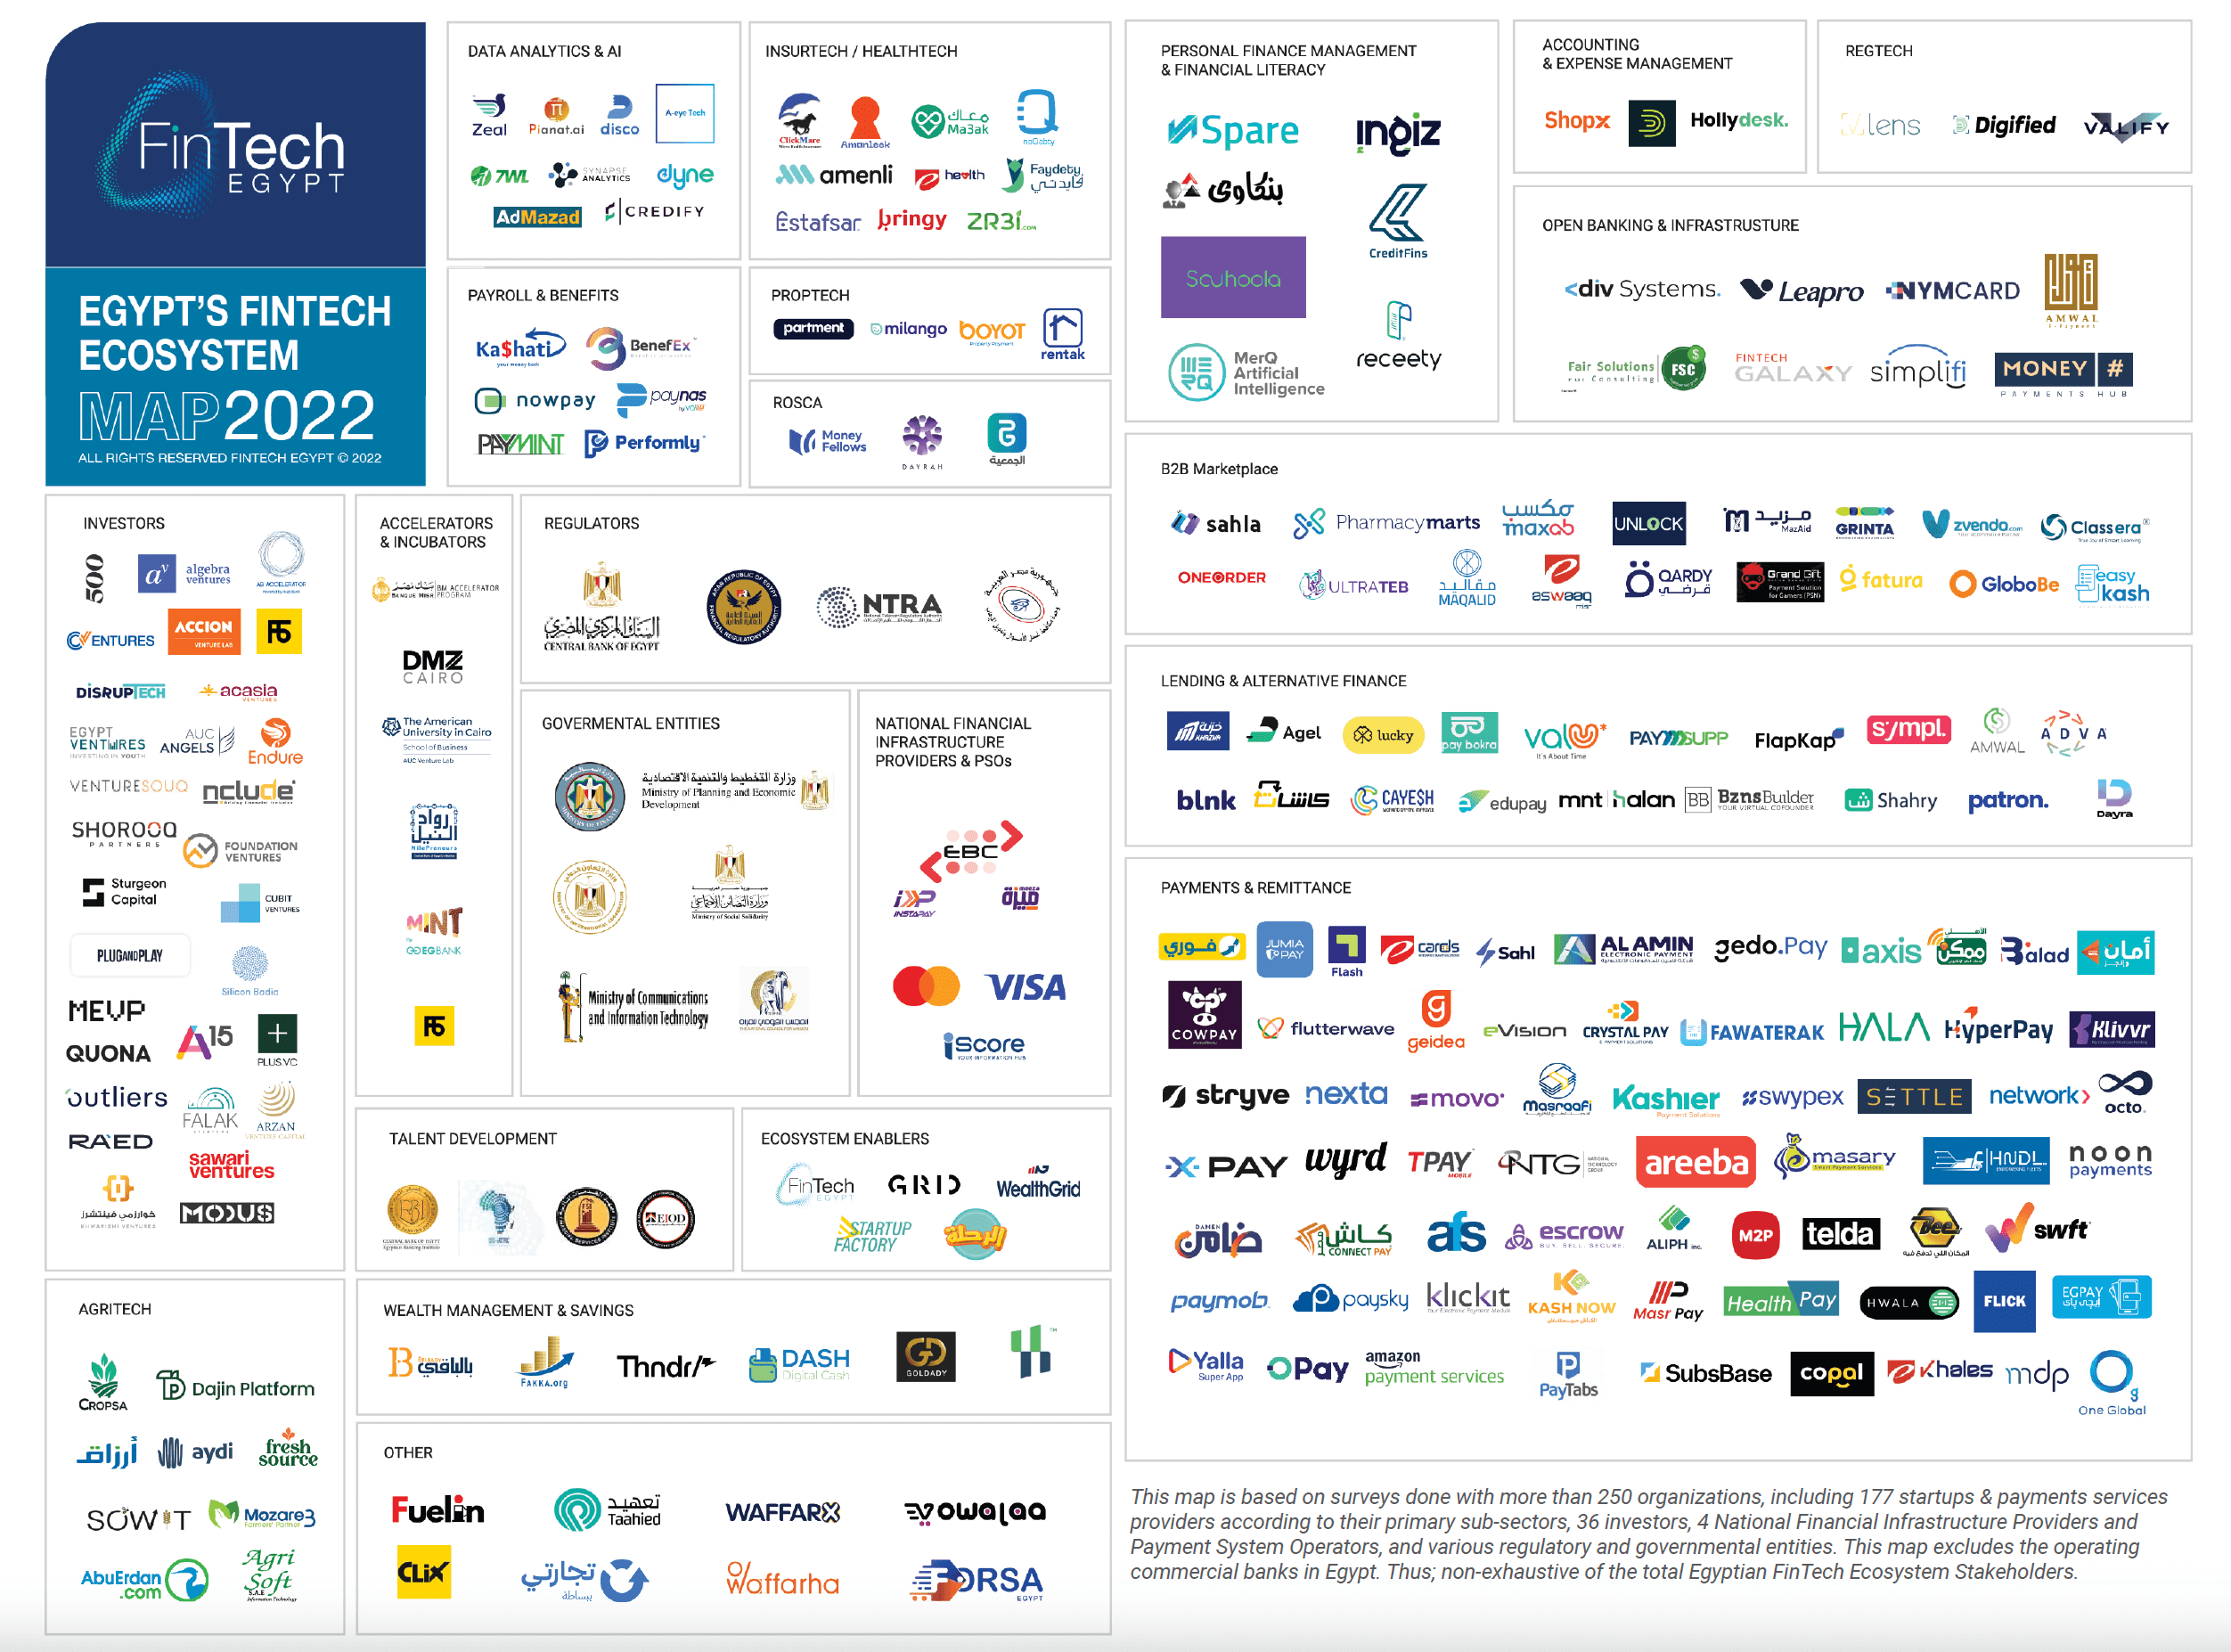 FinTech Egypt releases its FinTech Investments-focused H1 2022 Landscape Review “Why Egypt is a promising market for FinTech Investments?”